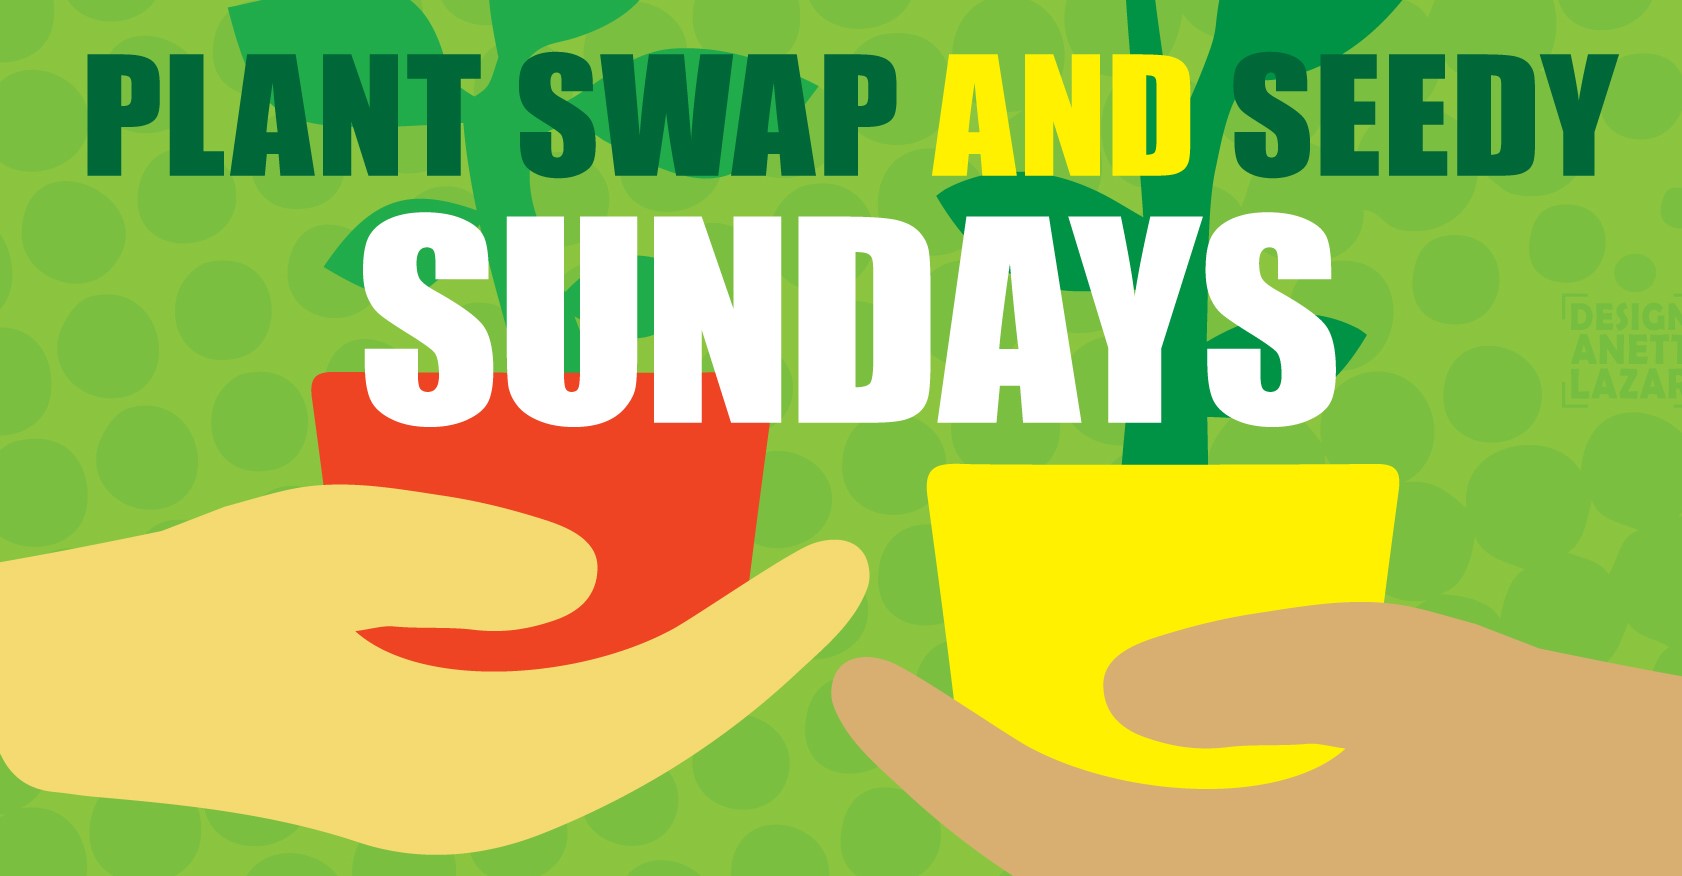 <h2>Plant Swap and Seedy Sundays</h2><div class='slide-content'><p><span class='highlight'>Swap seedlings and seeds at our public events</span></p></div><a href='/plant-swap' class='btn' title='Read more'>Read more</a>